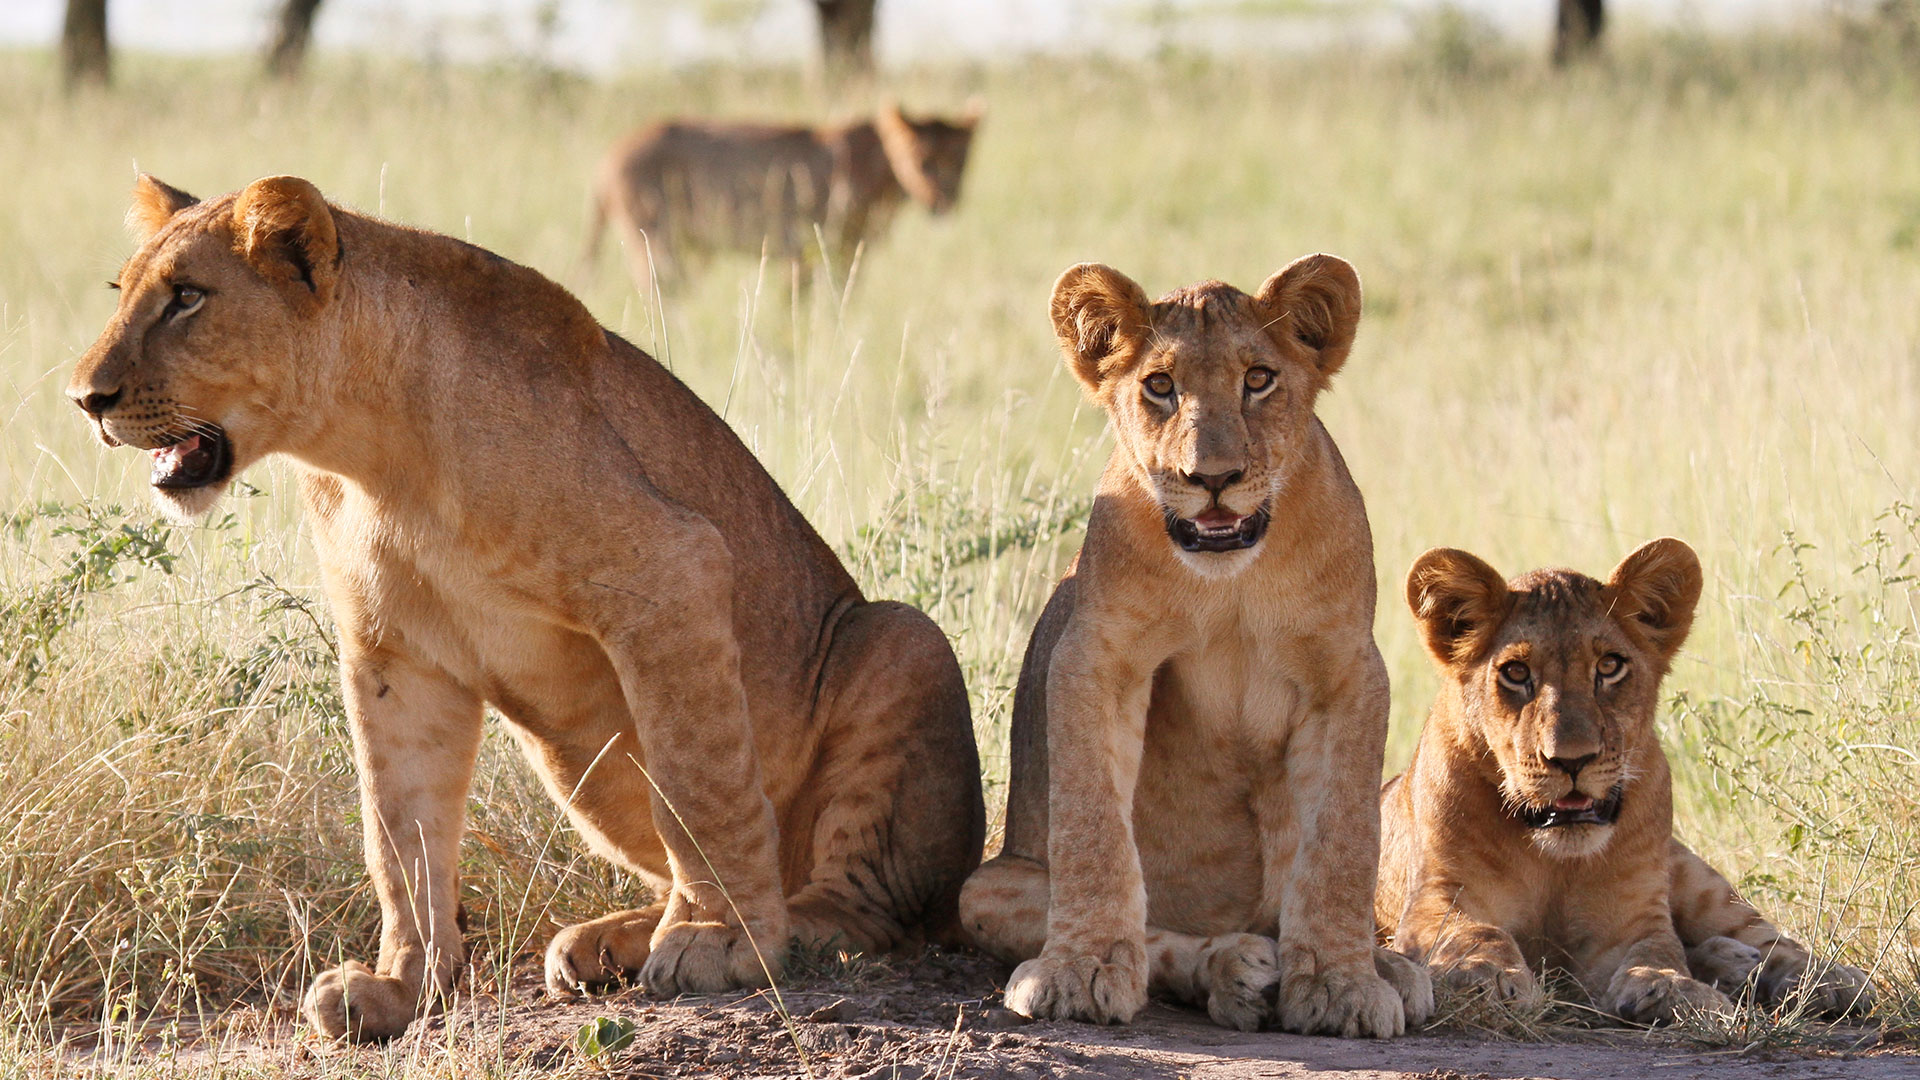 Lions in Gorongosa National Park, Mozambique